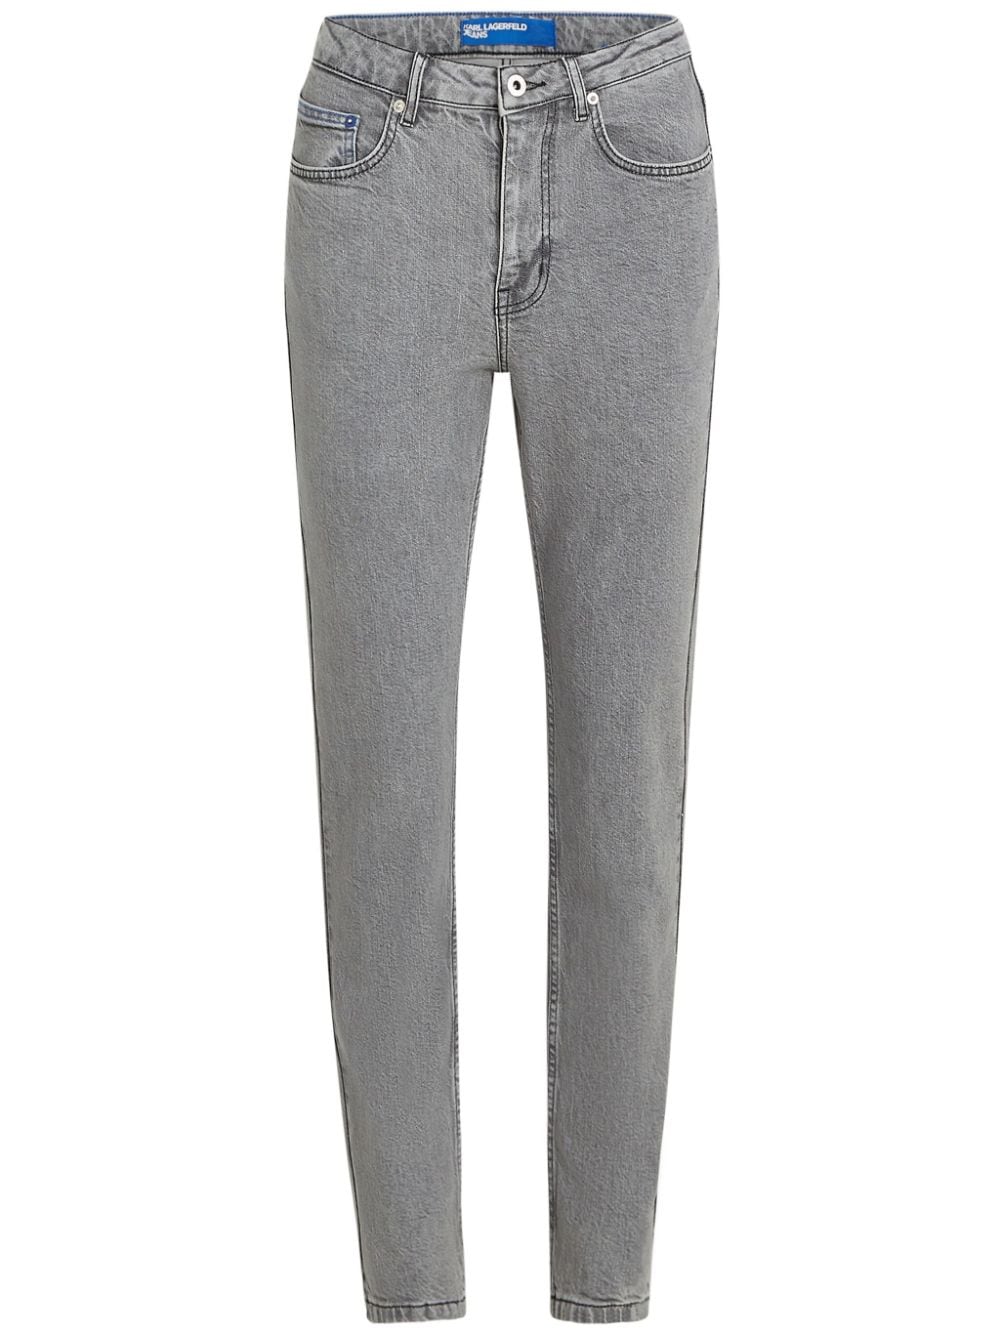 Karl Lagerfeld Jeans high-rise tapered jeans - Grey von Karl Lagerfeld Jeans